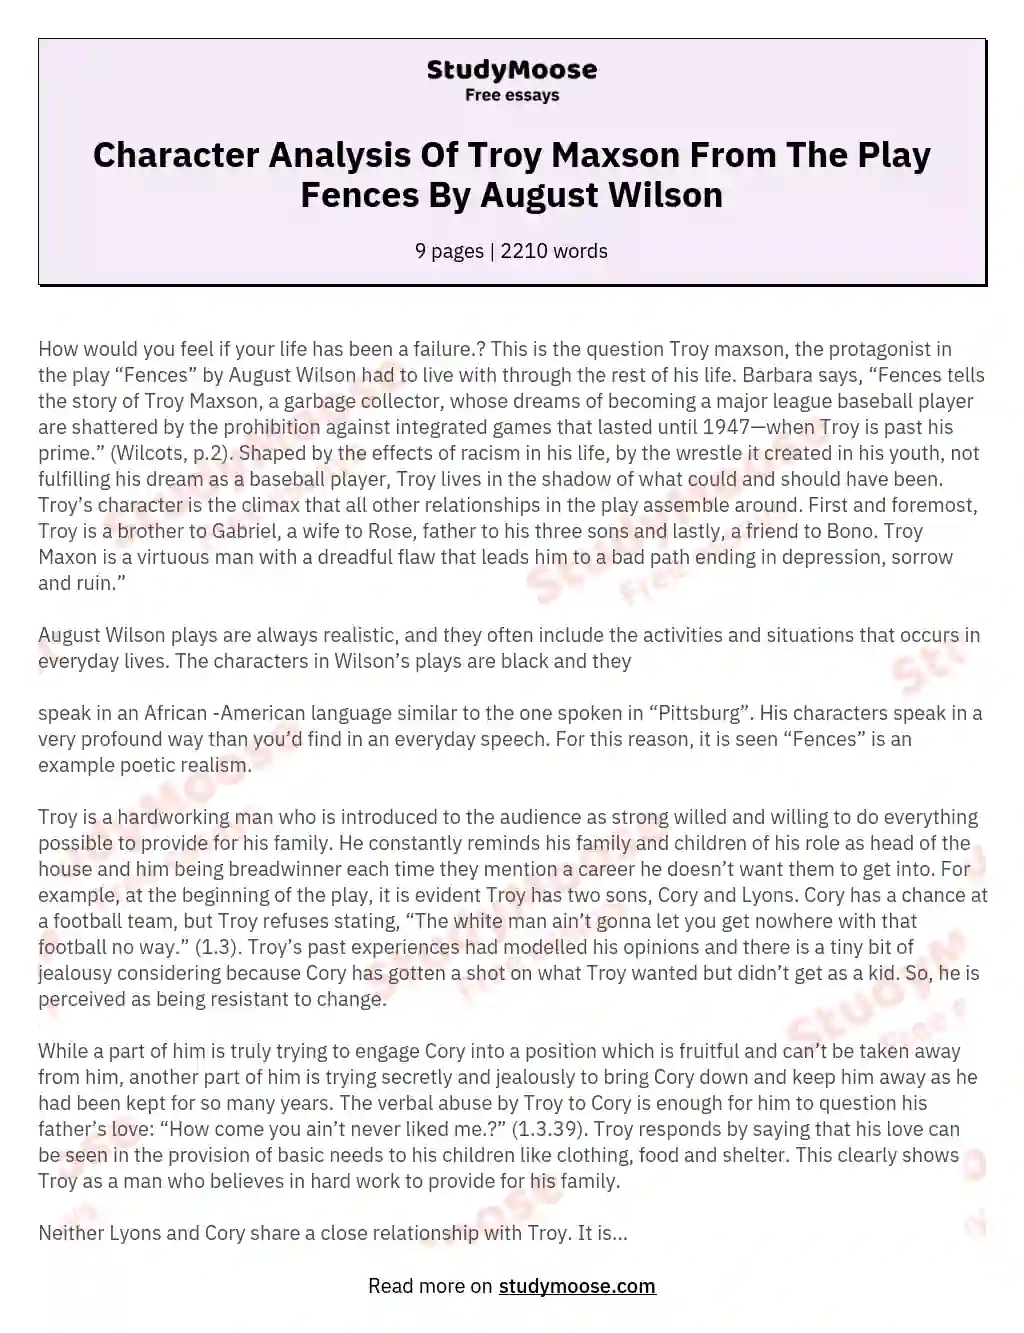 Character Analysis Of Troy Maxson From The Play Fences By August Wilson essay